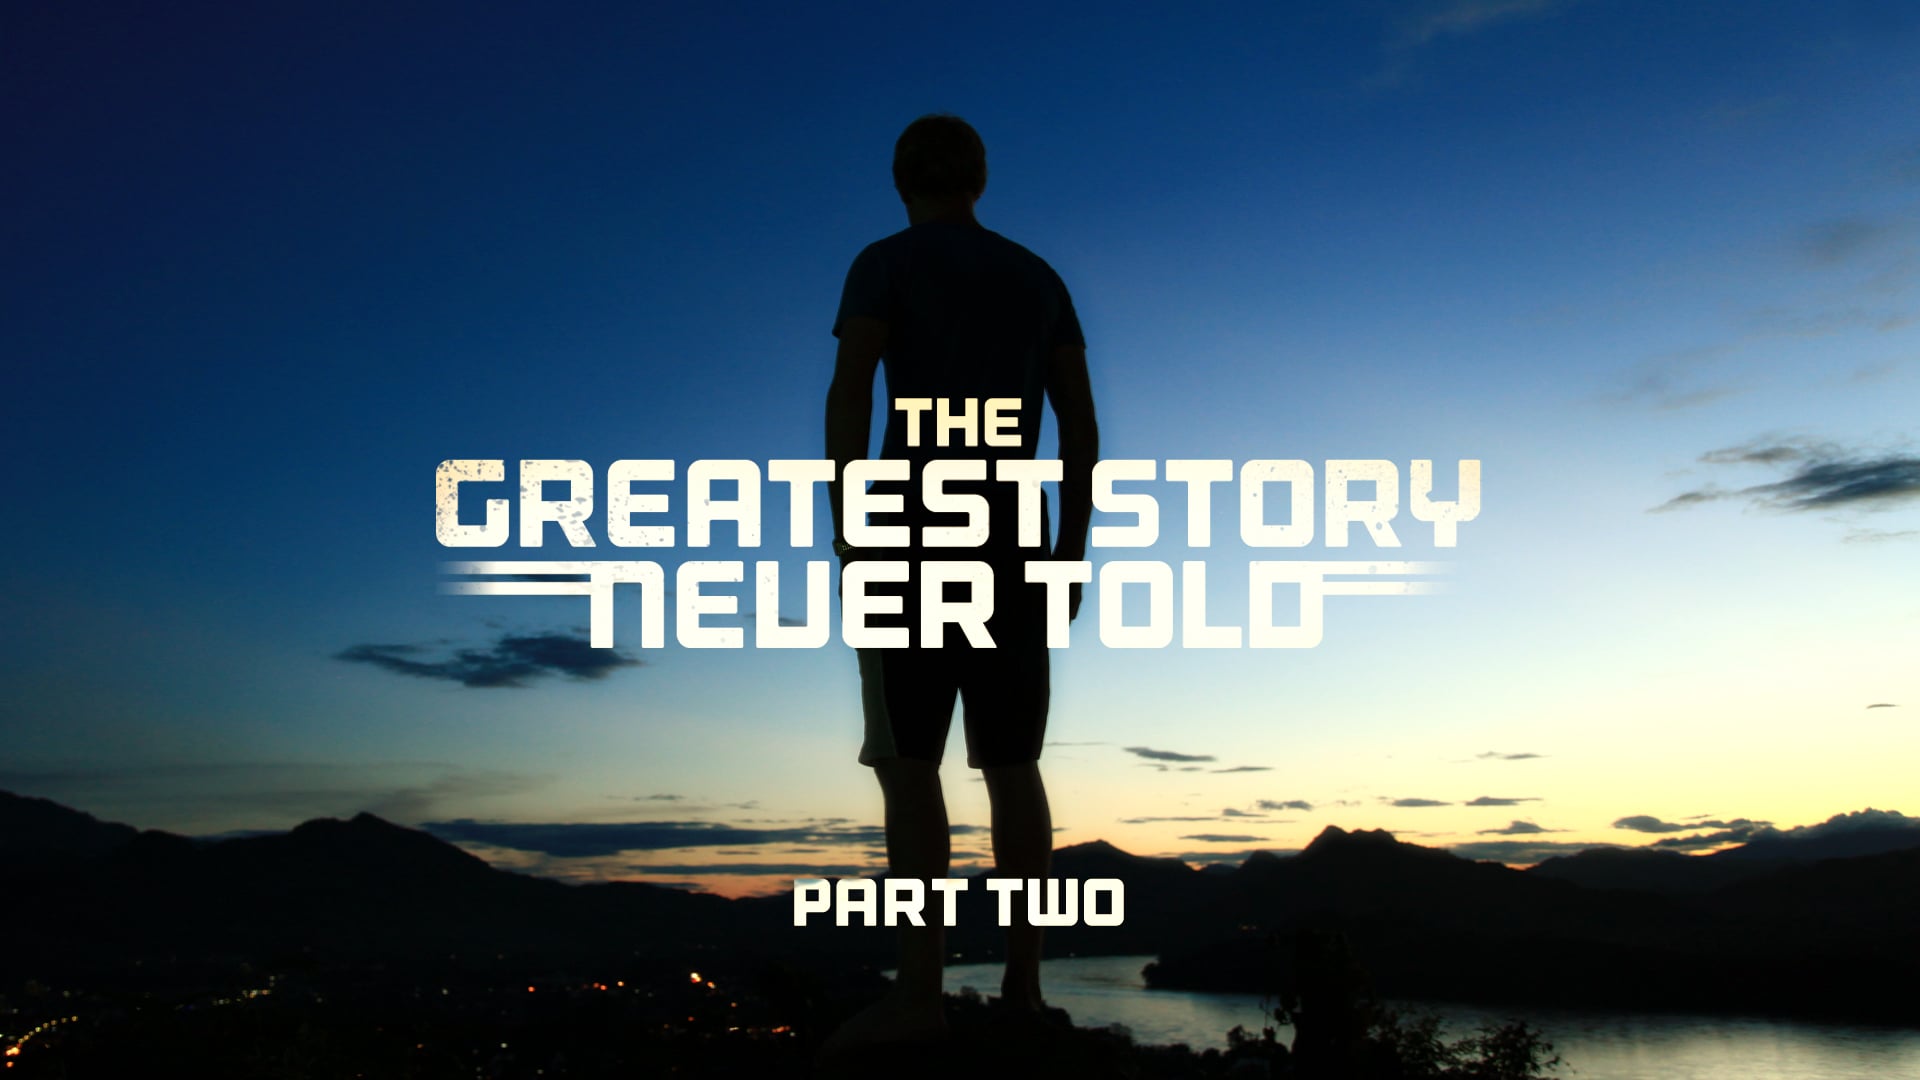 The greatest story never told